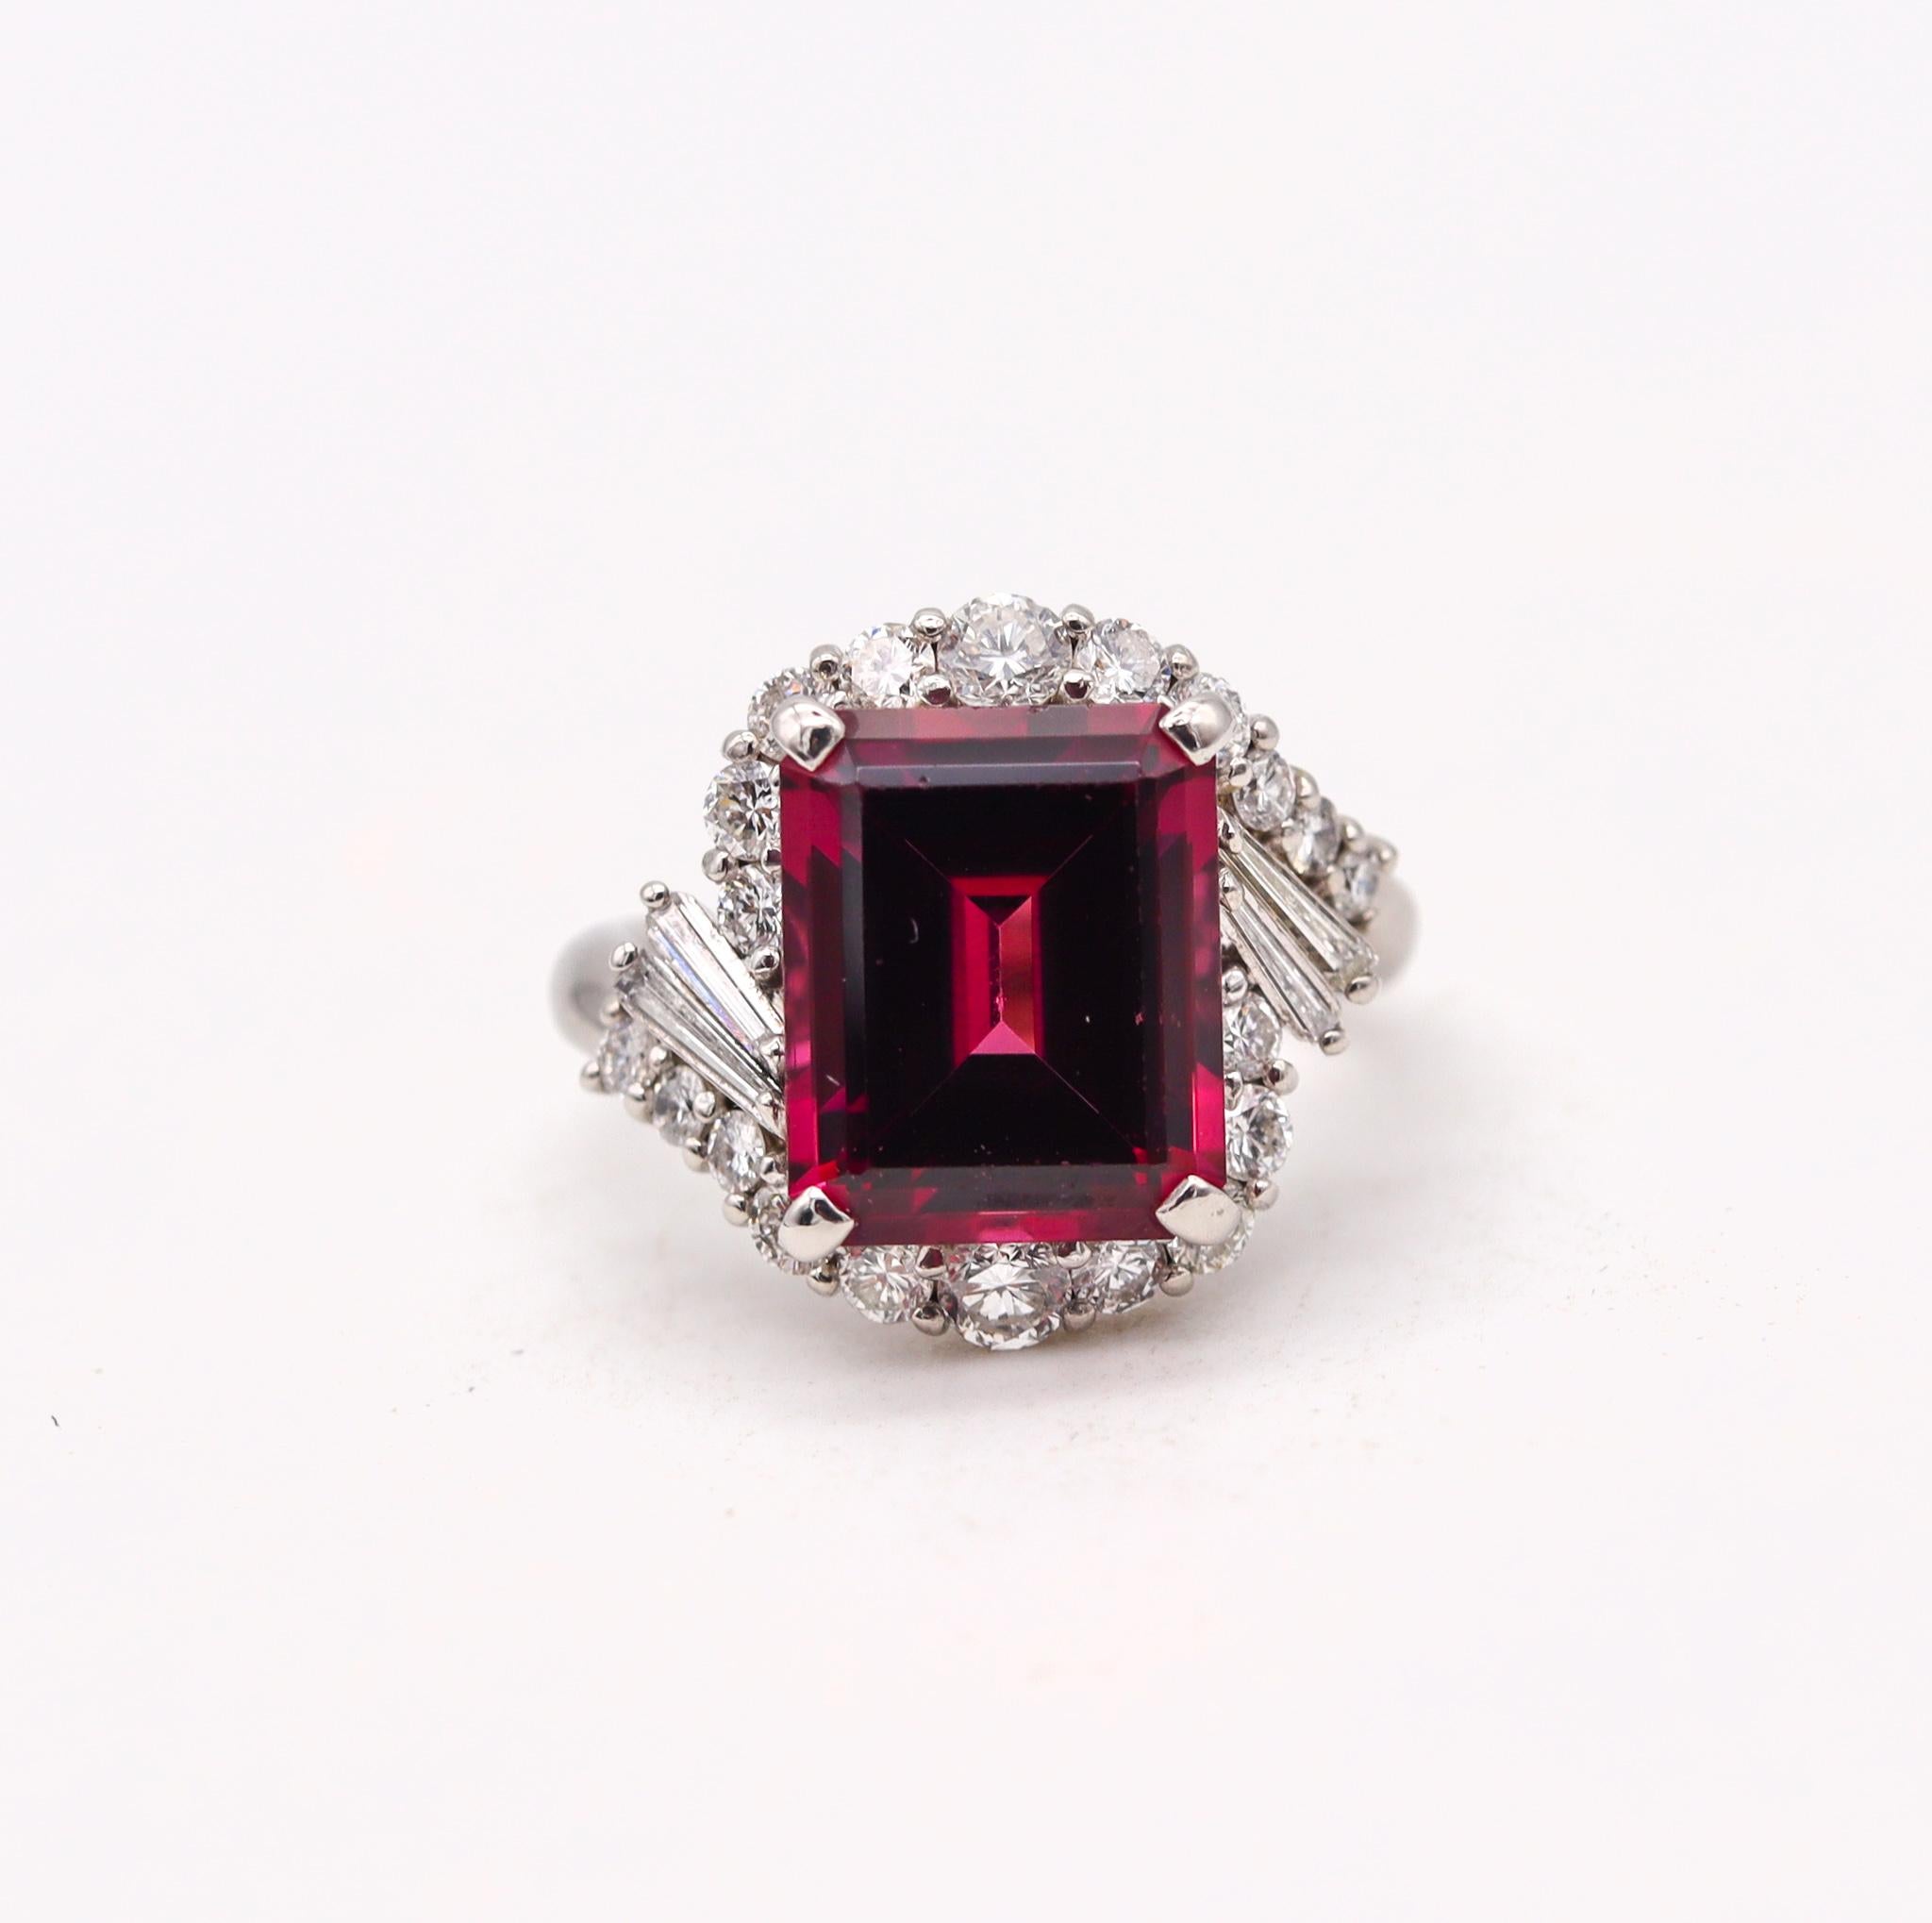 Modern Contemporary Cocktail Ring in Platinum with 6.69 Cts in Diamonds & Rubellite